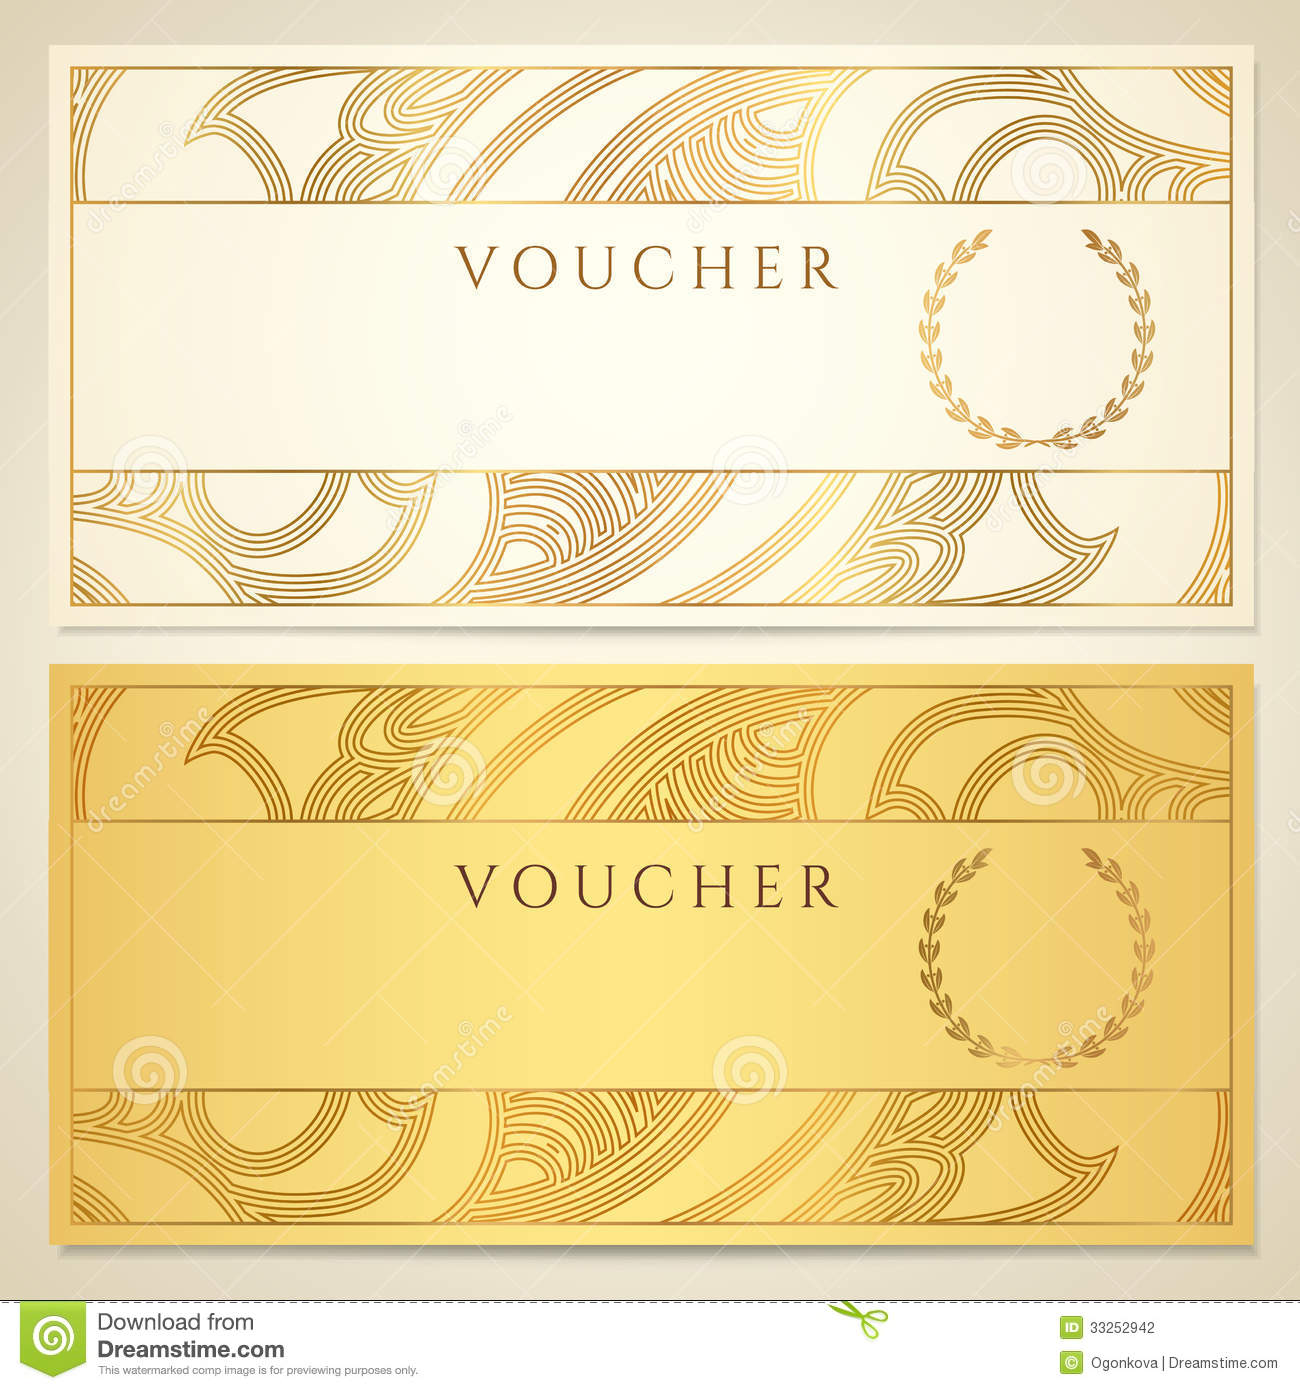 Voucher Gift Certificate Coupon Template  Stock Photography   Image